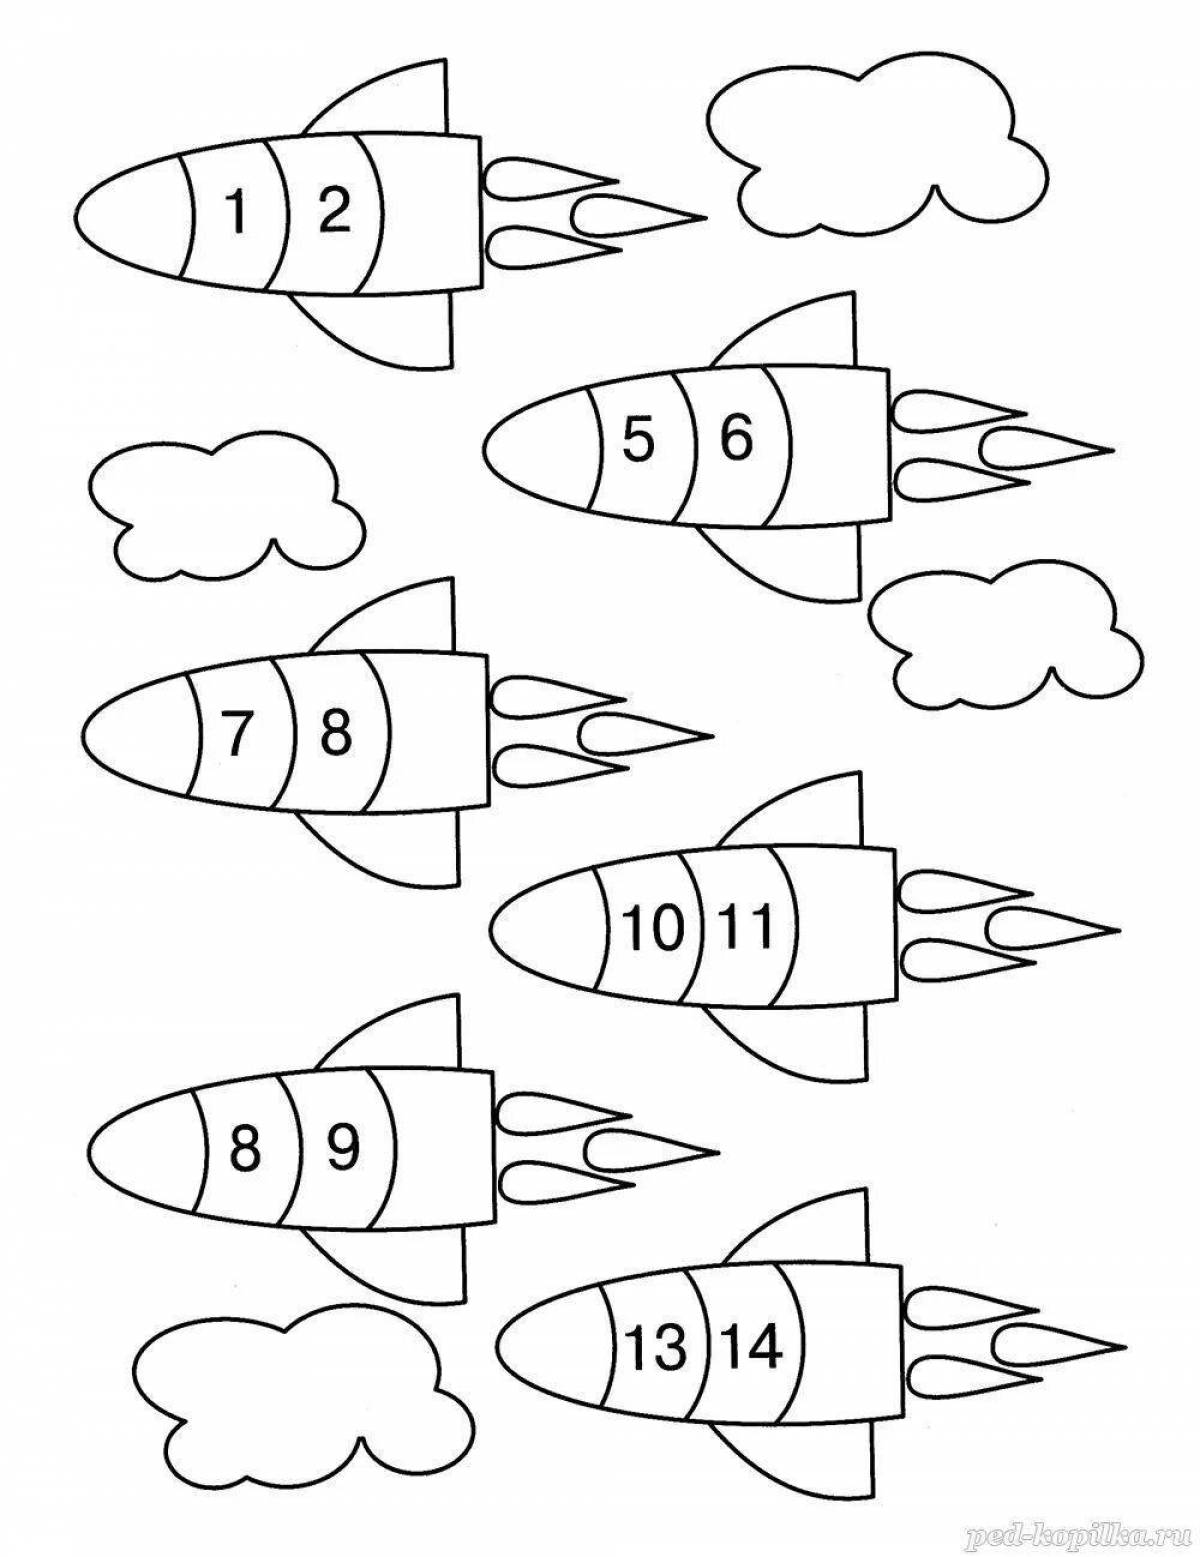 Entertaining math coloring book for 5-6 year olds